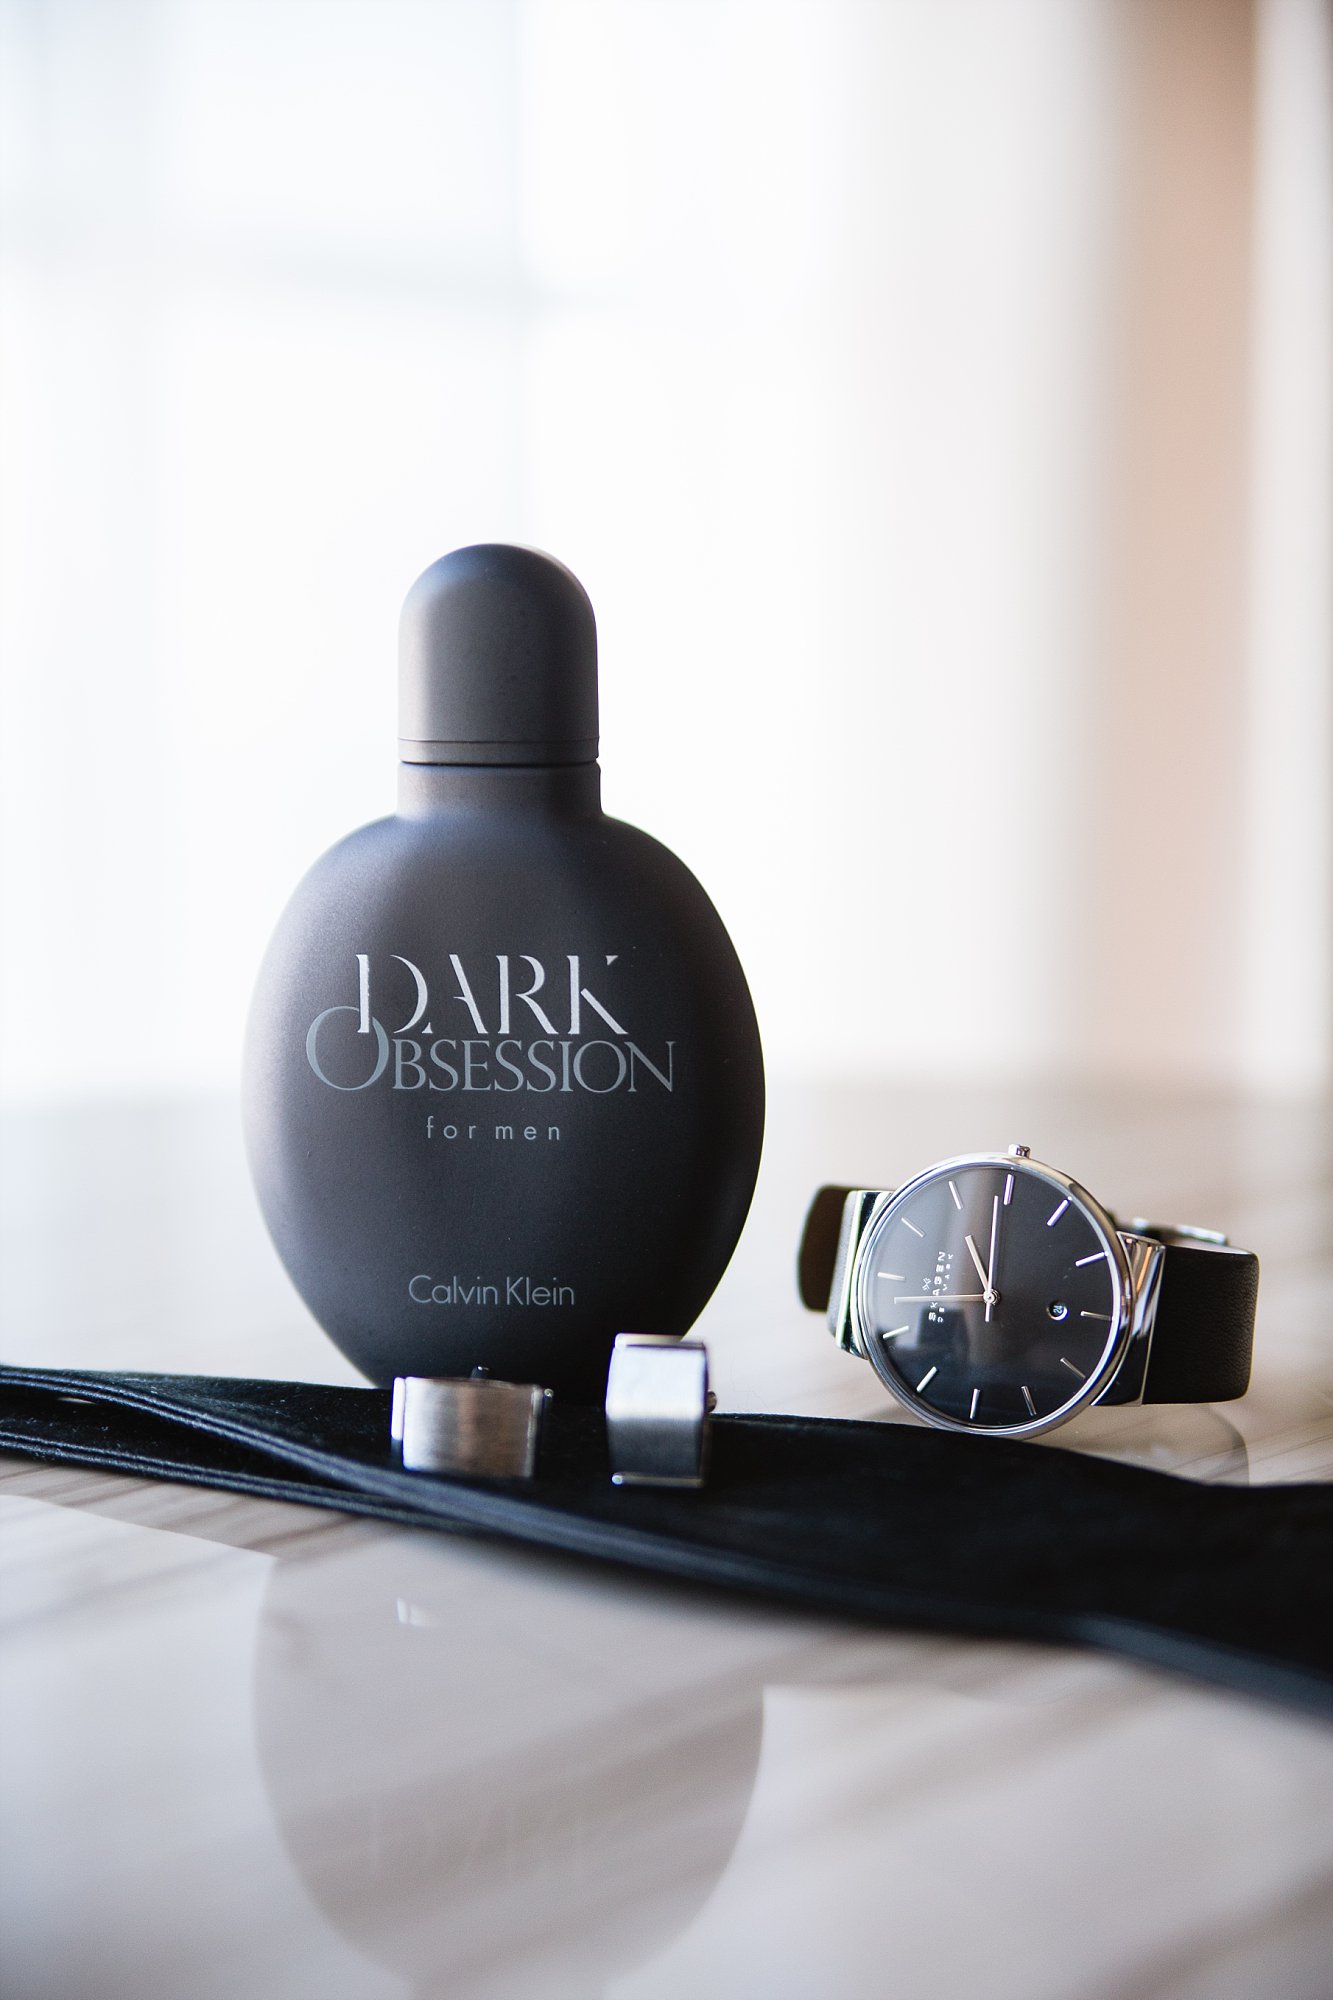 Detail image of groom's Dark Obsession cologne, black wedding watch, cuff links, and bow tie by Phoenix wedding photography PMA Photography.